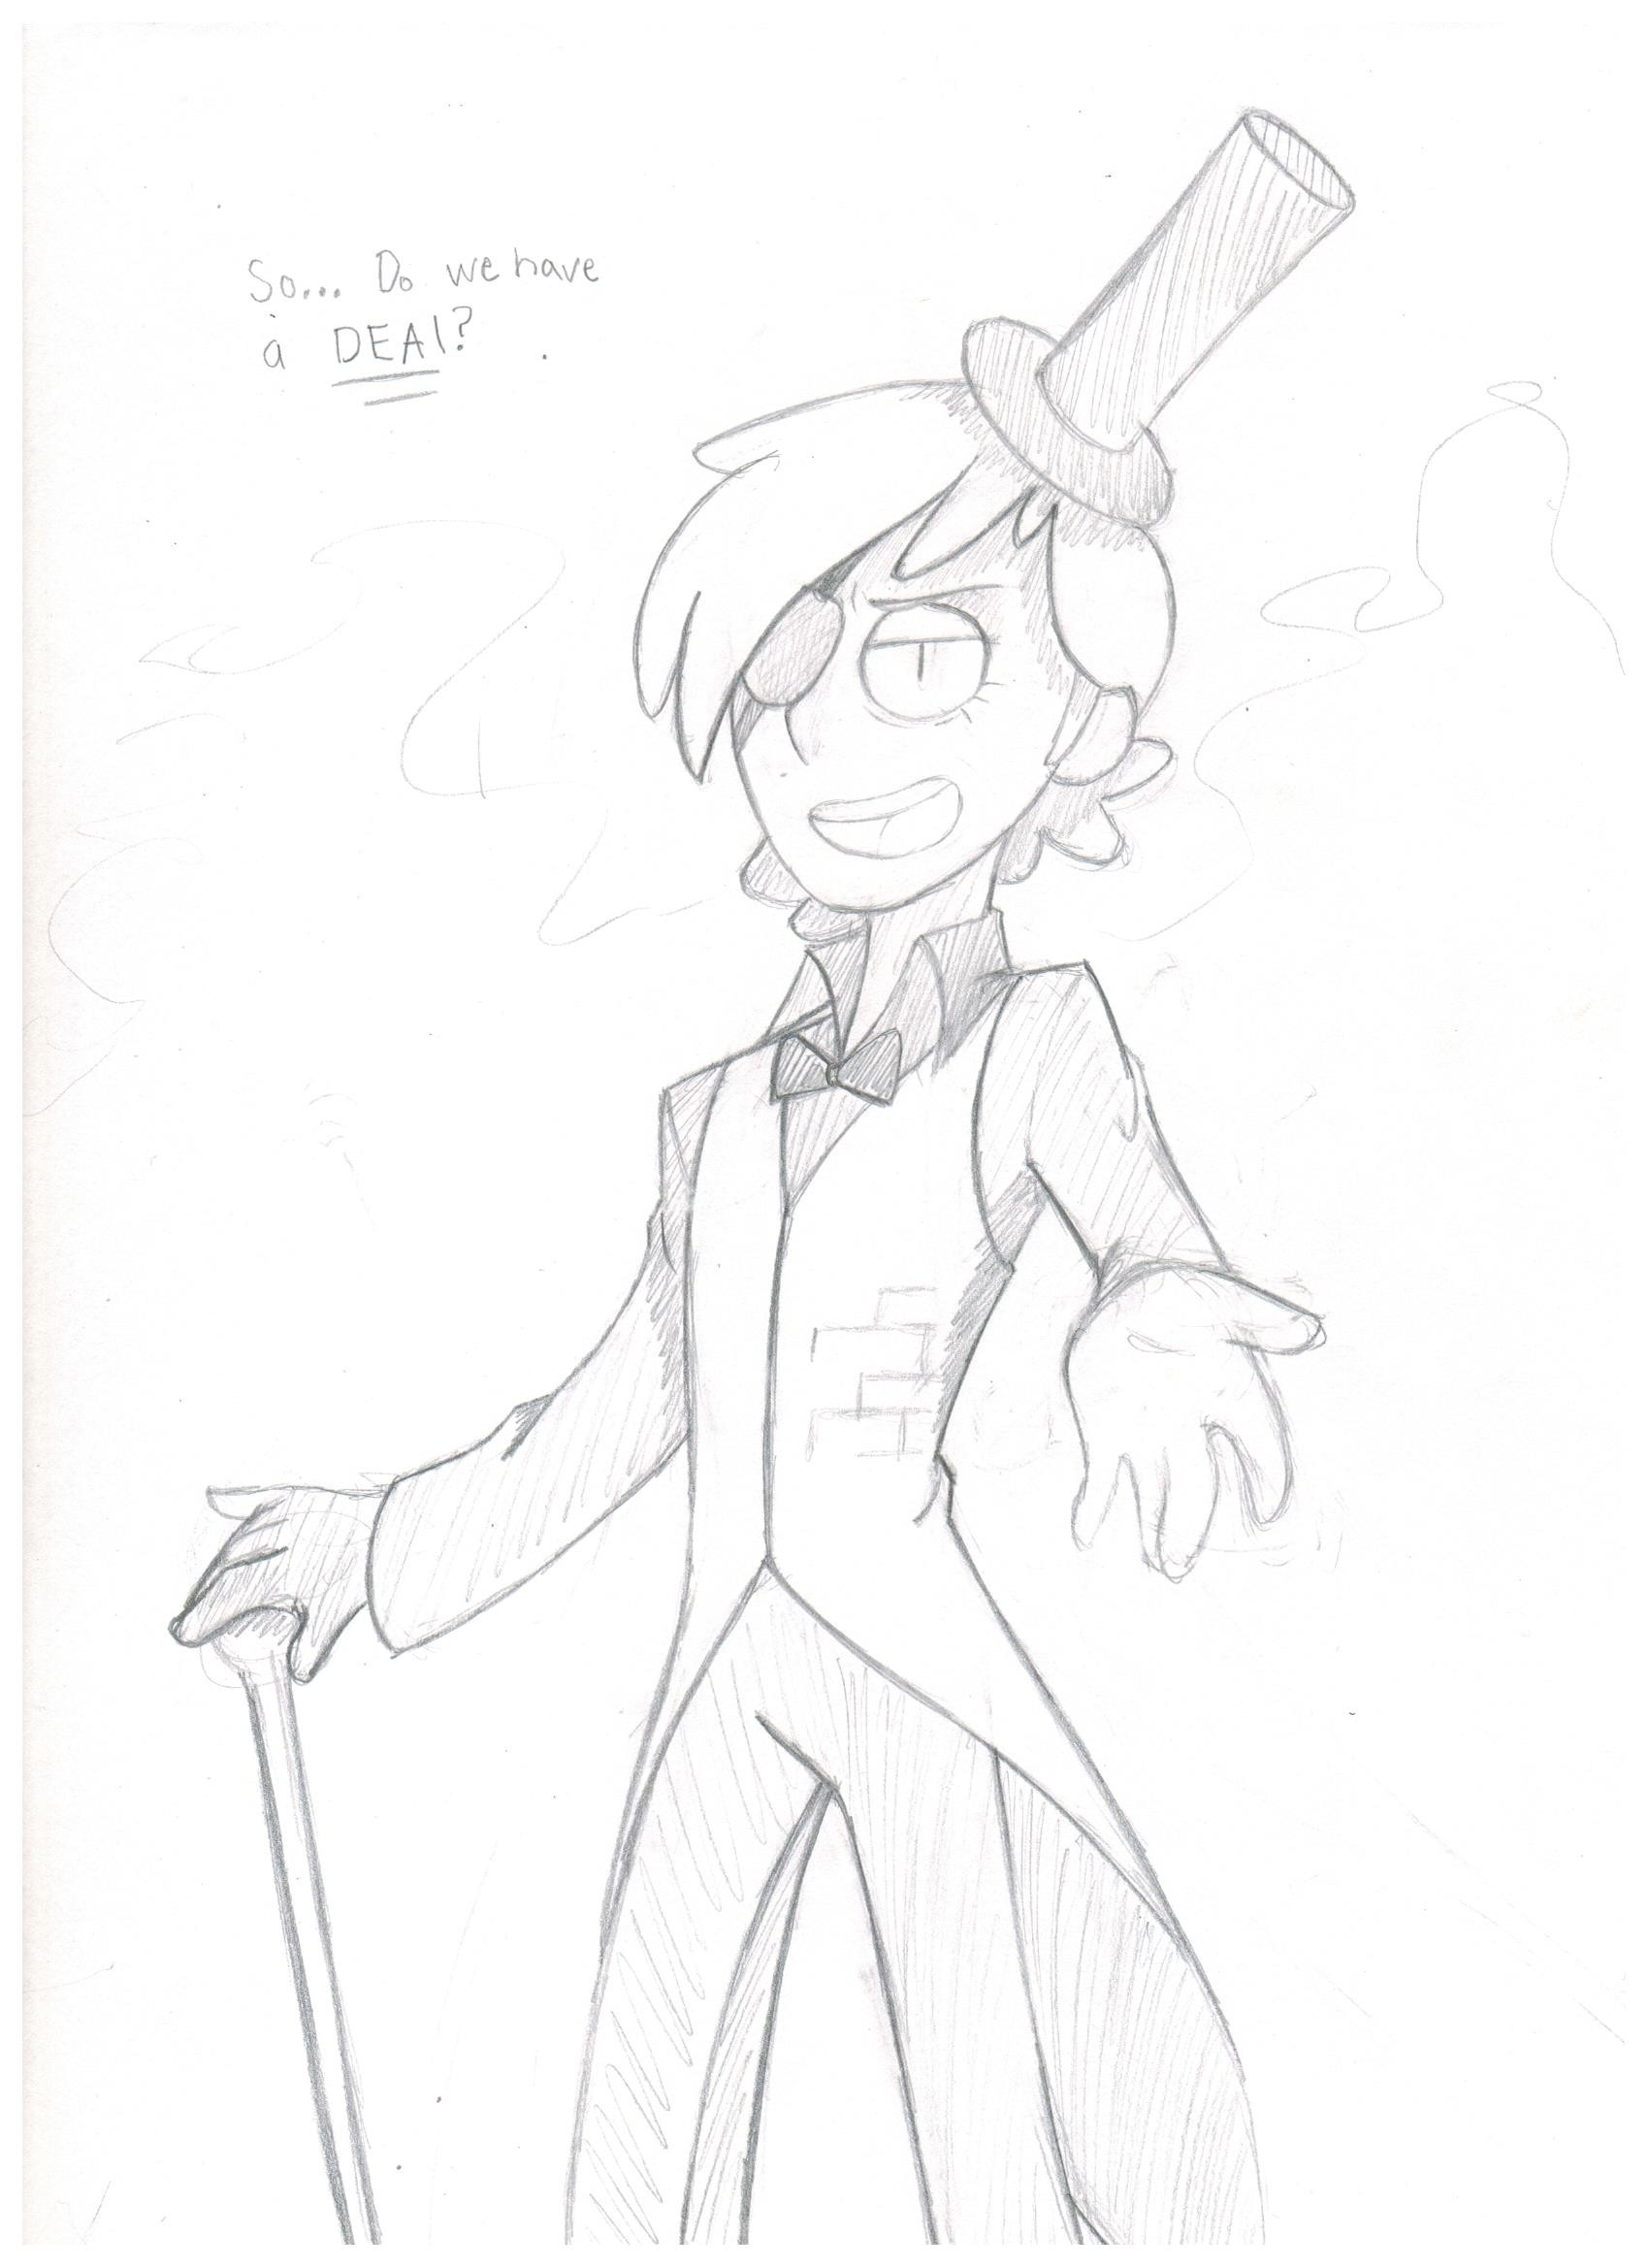 1700x2338 ... Make a deal with Human Bill Cipher- sketch by Proxamina